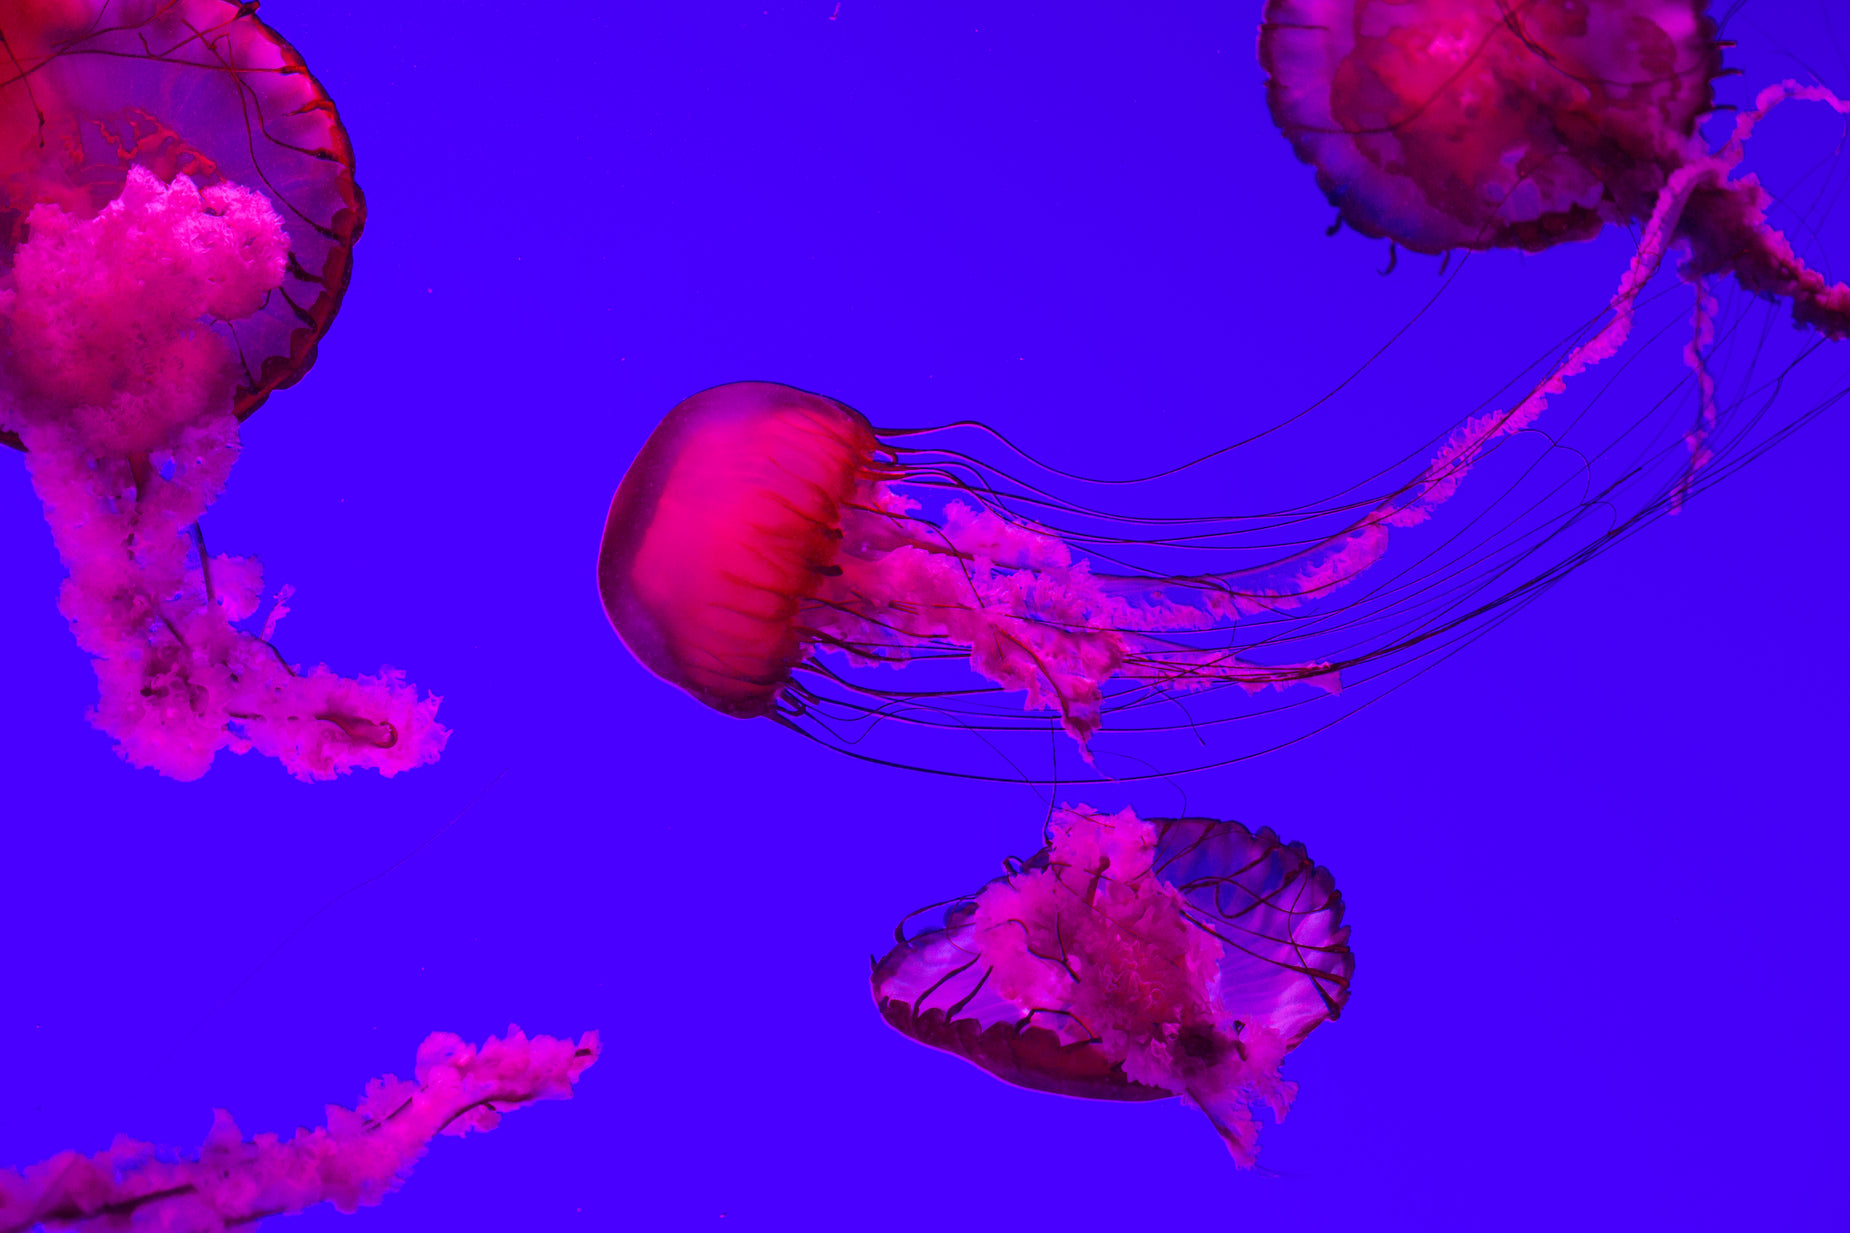 a bunch of jelly fish that are flying through the air